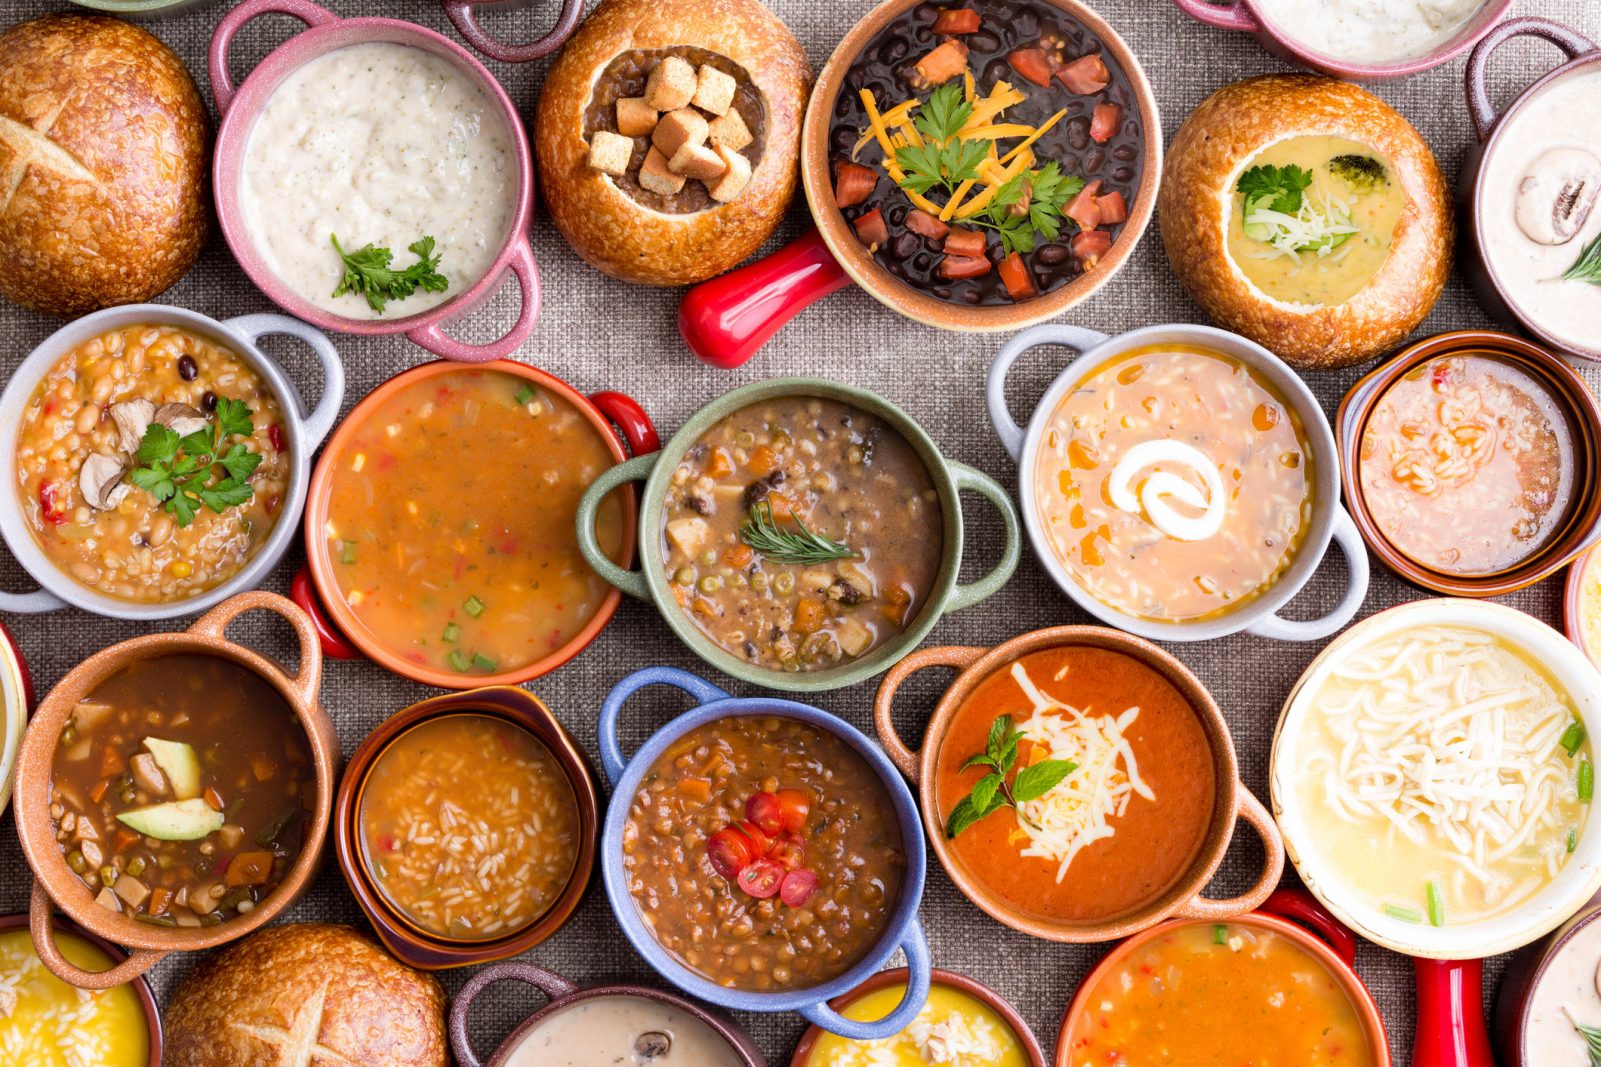 Eat Your Way Through a Buffet and We’ll Reveal the True Age of Your Soul variety of soups